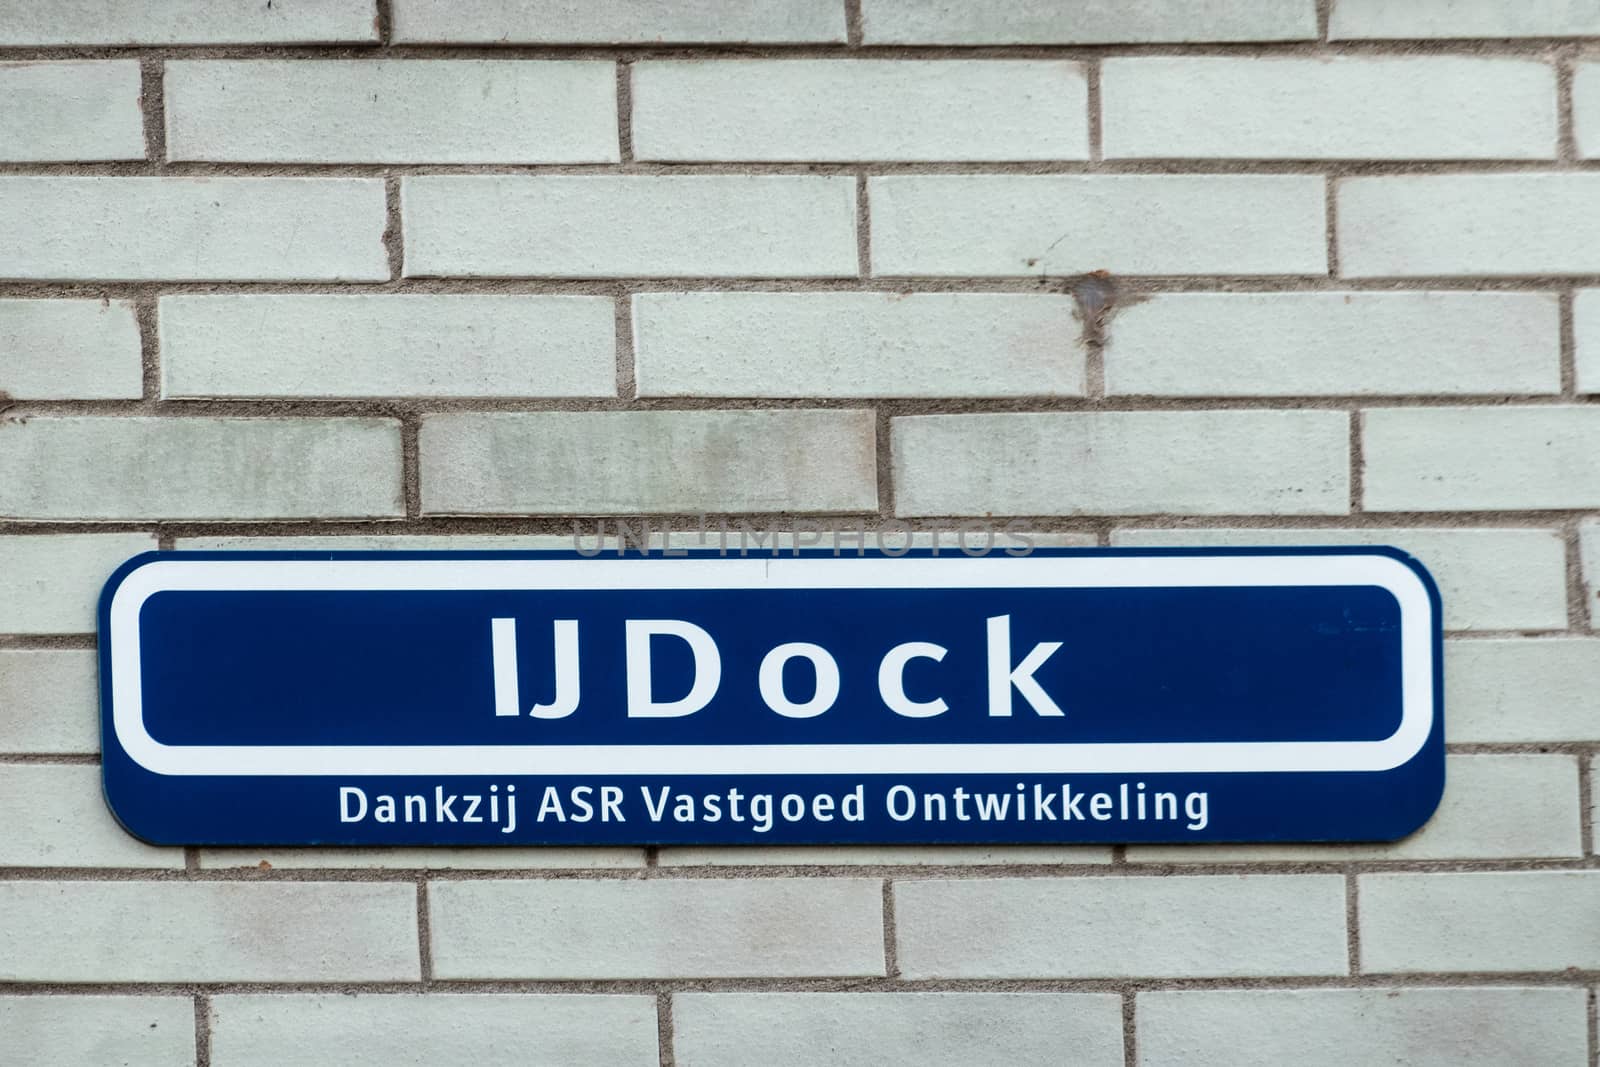 IJDOCk street sign against white brick wall, Amsterdam Netherlan by Claudine